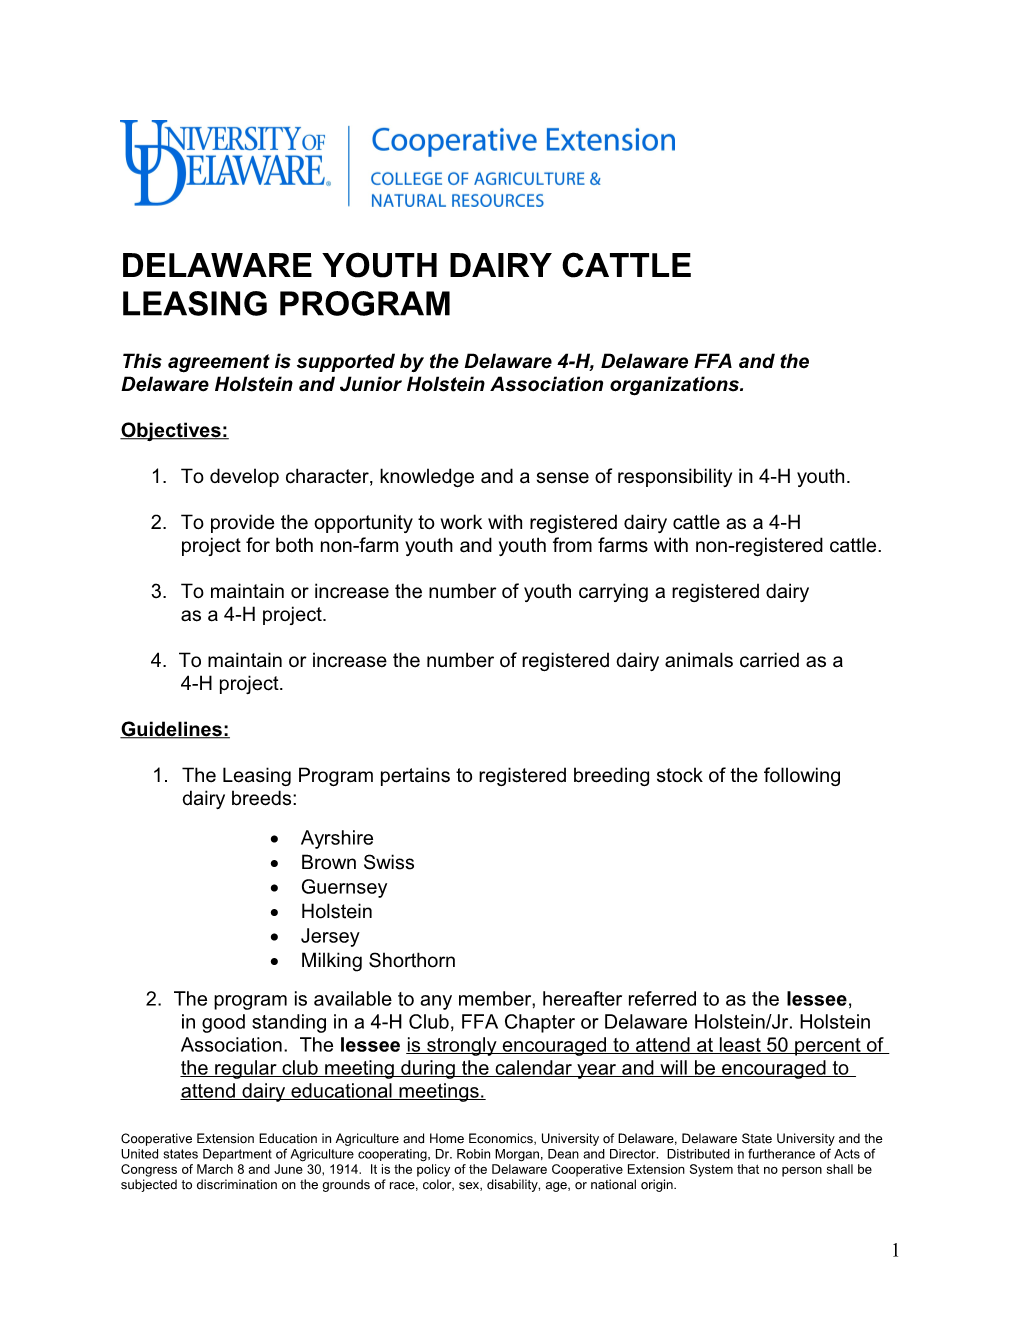 Delaware 4-H Dairy Cattle